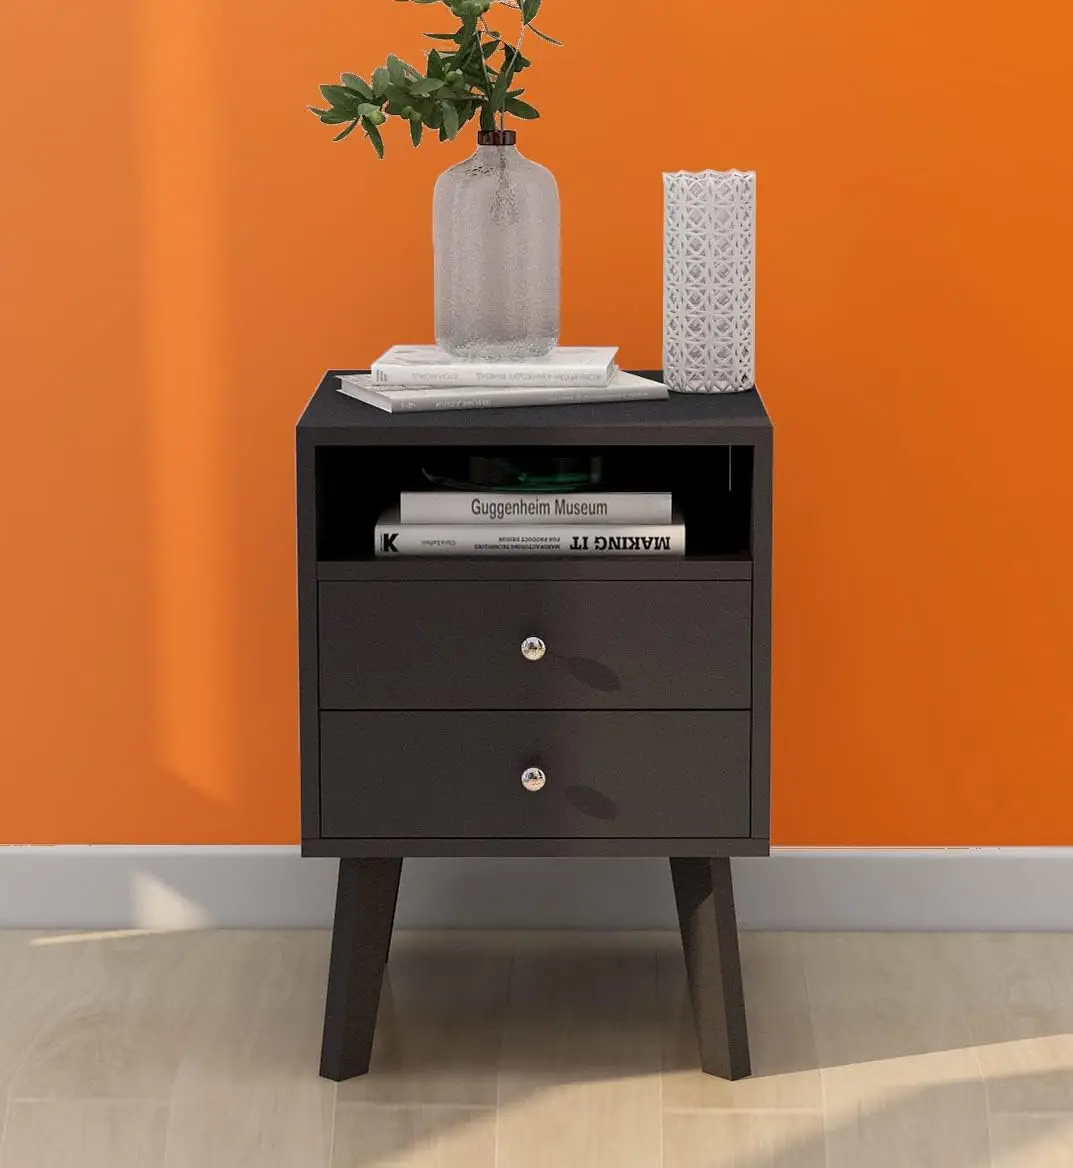 Black Nightstands Bedroom Bedside Tables MDF Wood Night Stands with 2 Drawers and Open Shelf